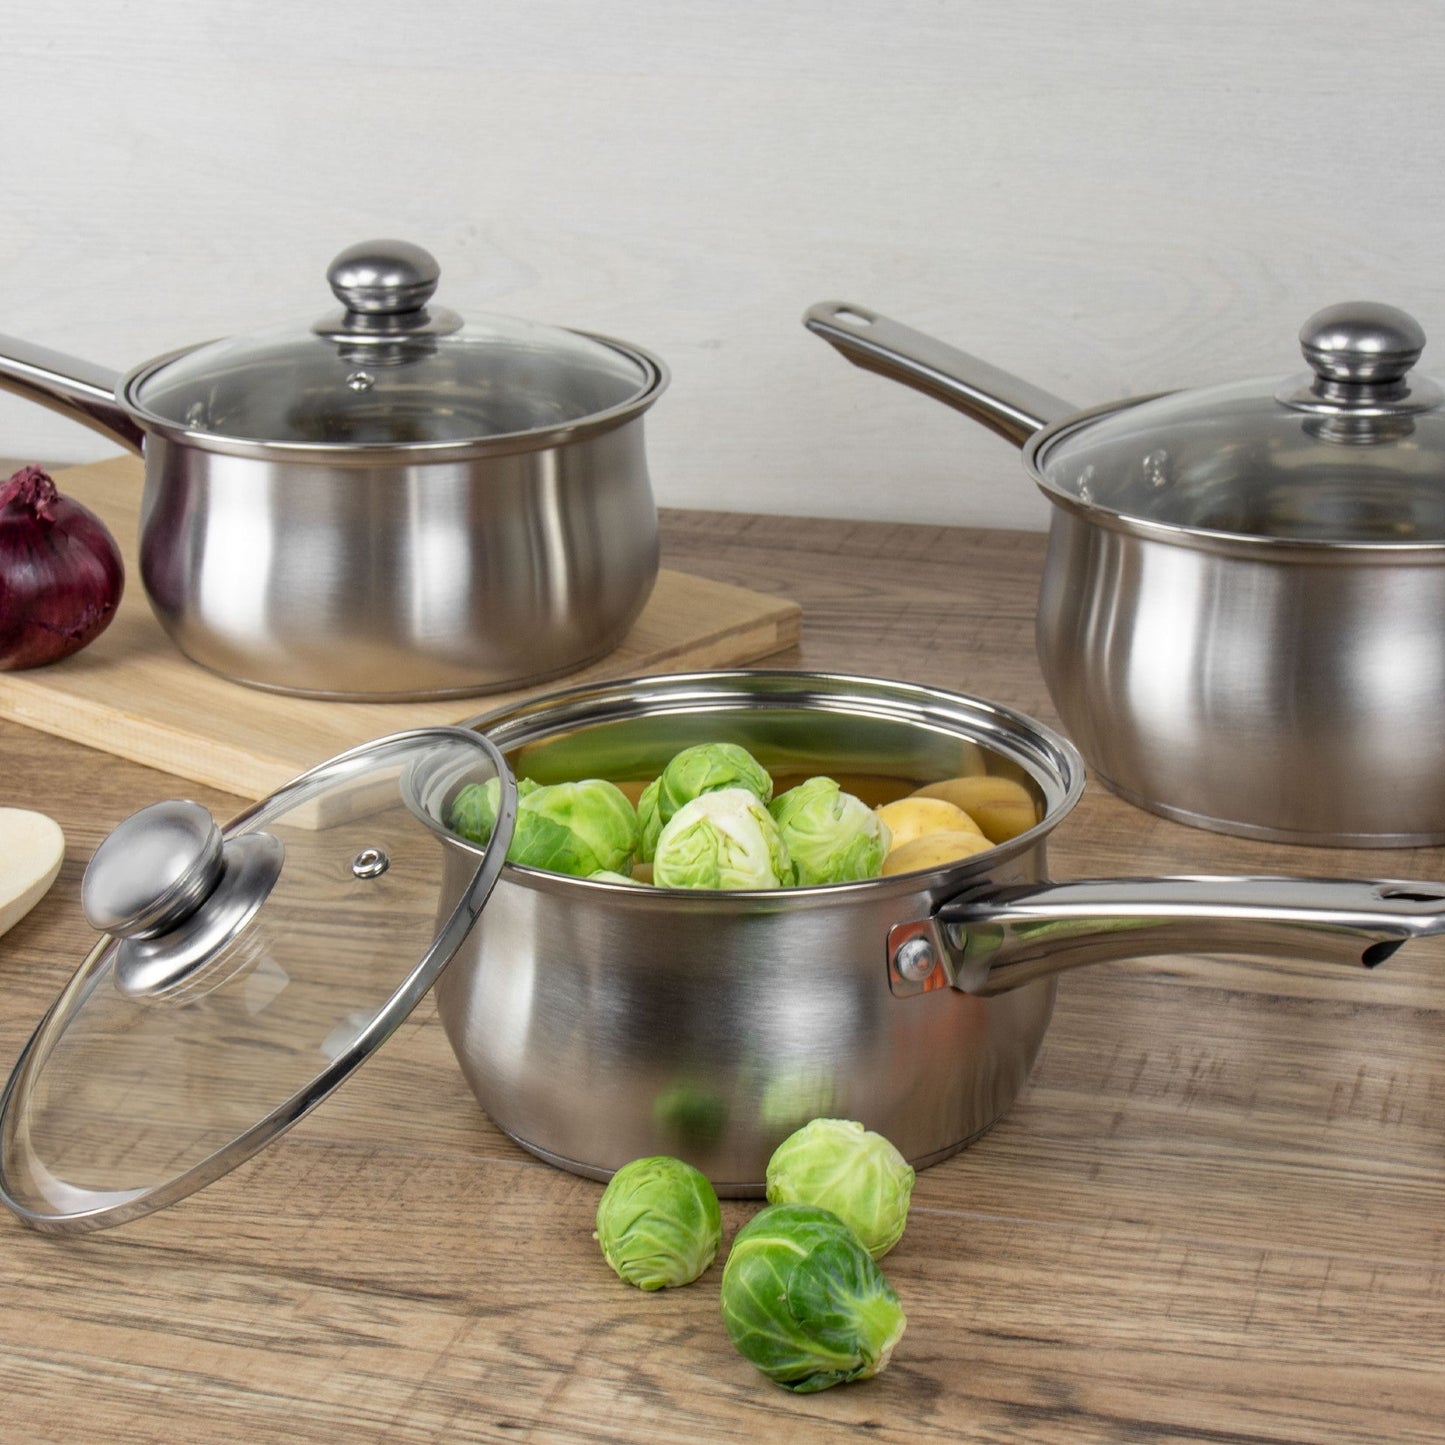 SQ Professional Lustro Stainless Steel Saucepan Set of 3 Silver 10657 (Big Parcel Rate)